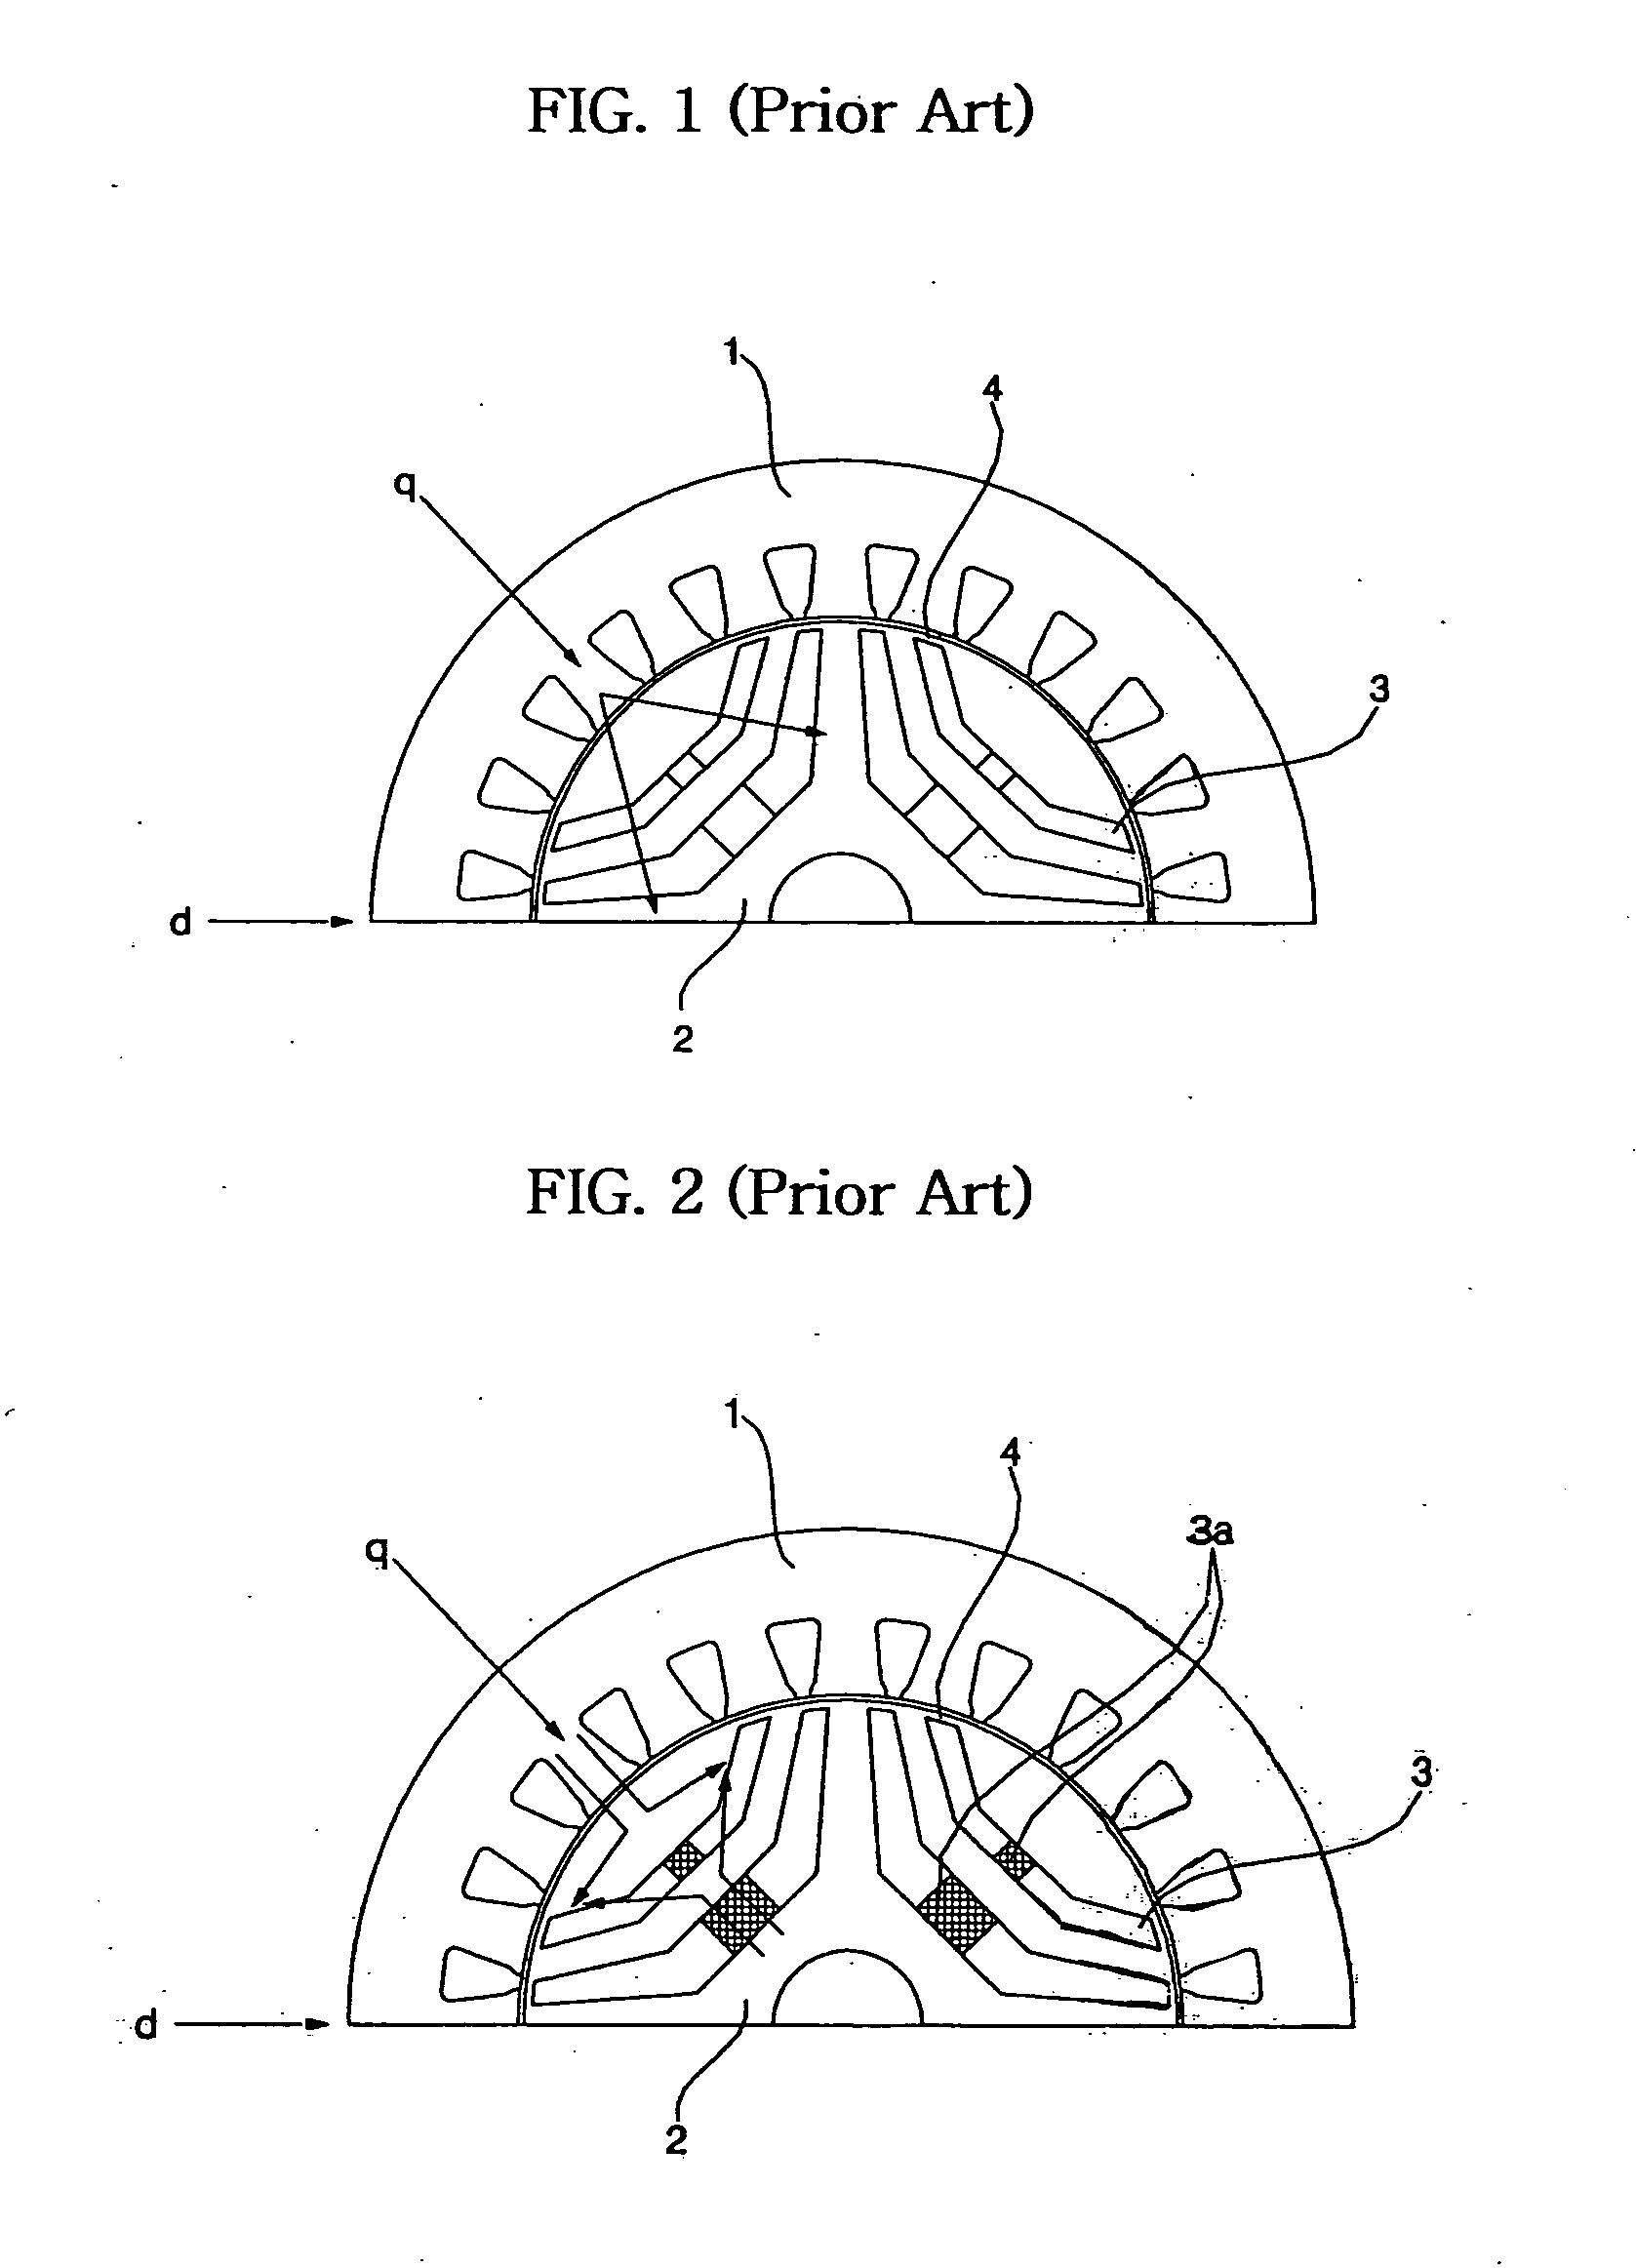 Permanent magnet assisted synRM and method for imposing magnetic force thereon